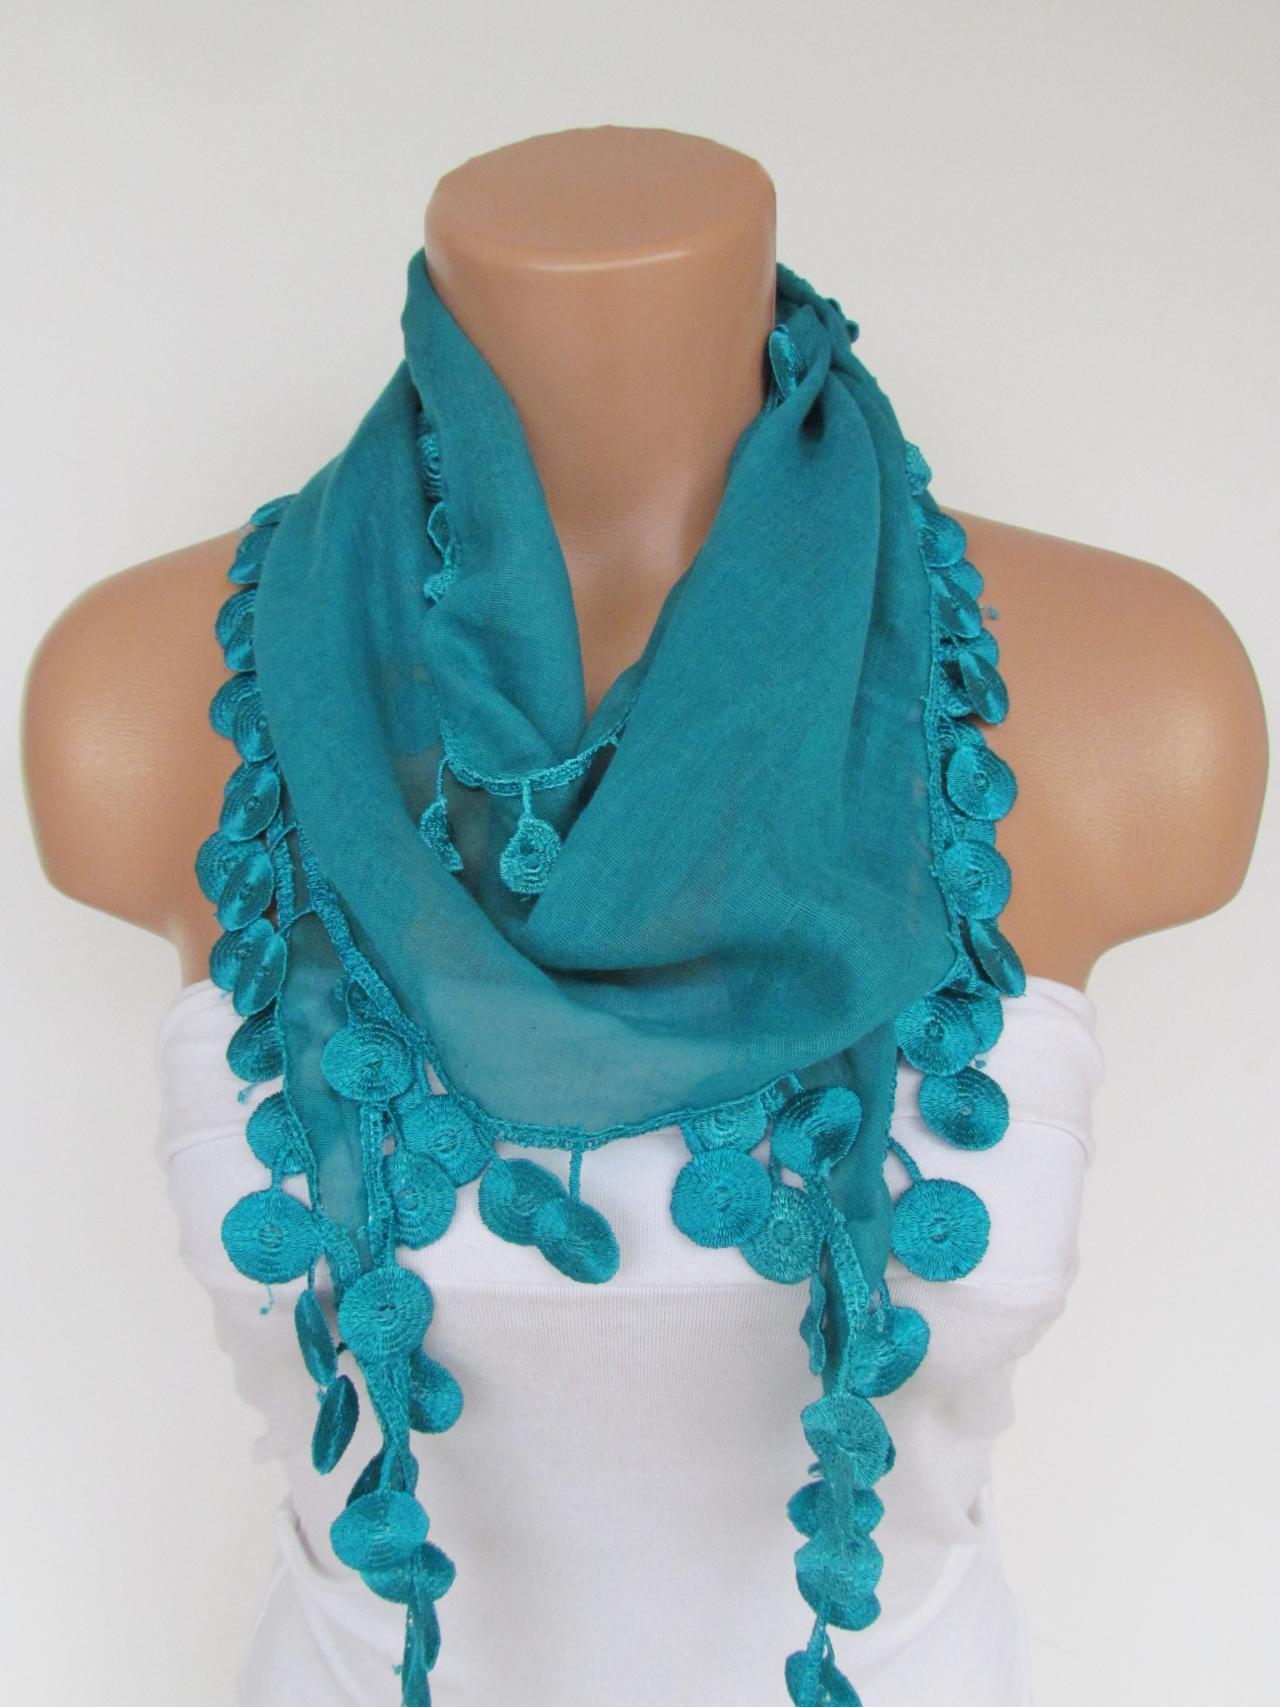 Long Scarf With Fringe-New Season Scarf-Headband-Necklace- Infinity Scarf- Spring Accessory-Turquoise Scarf-New Season-Gift